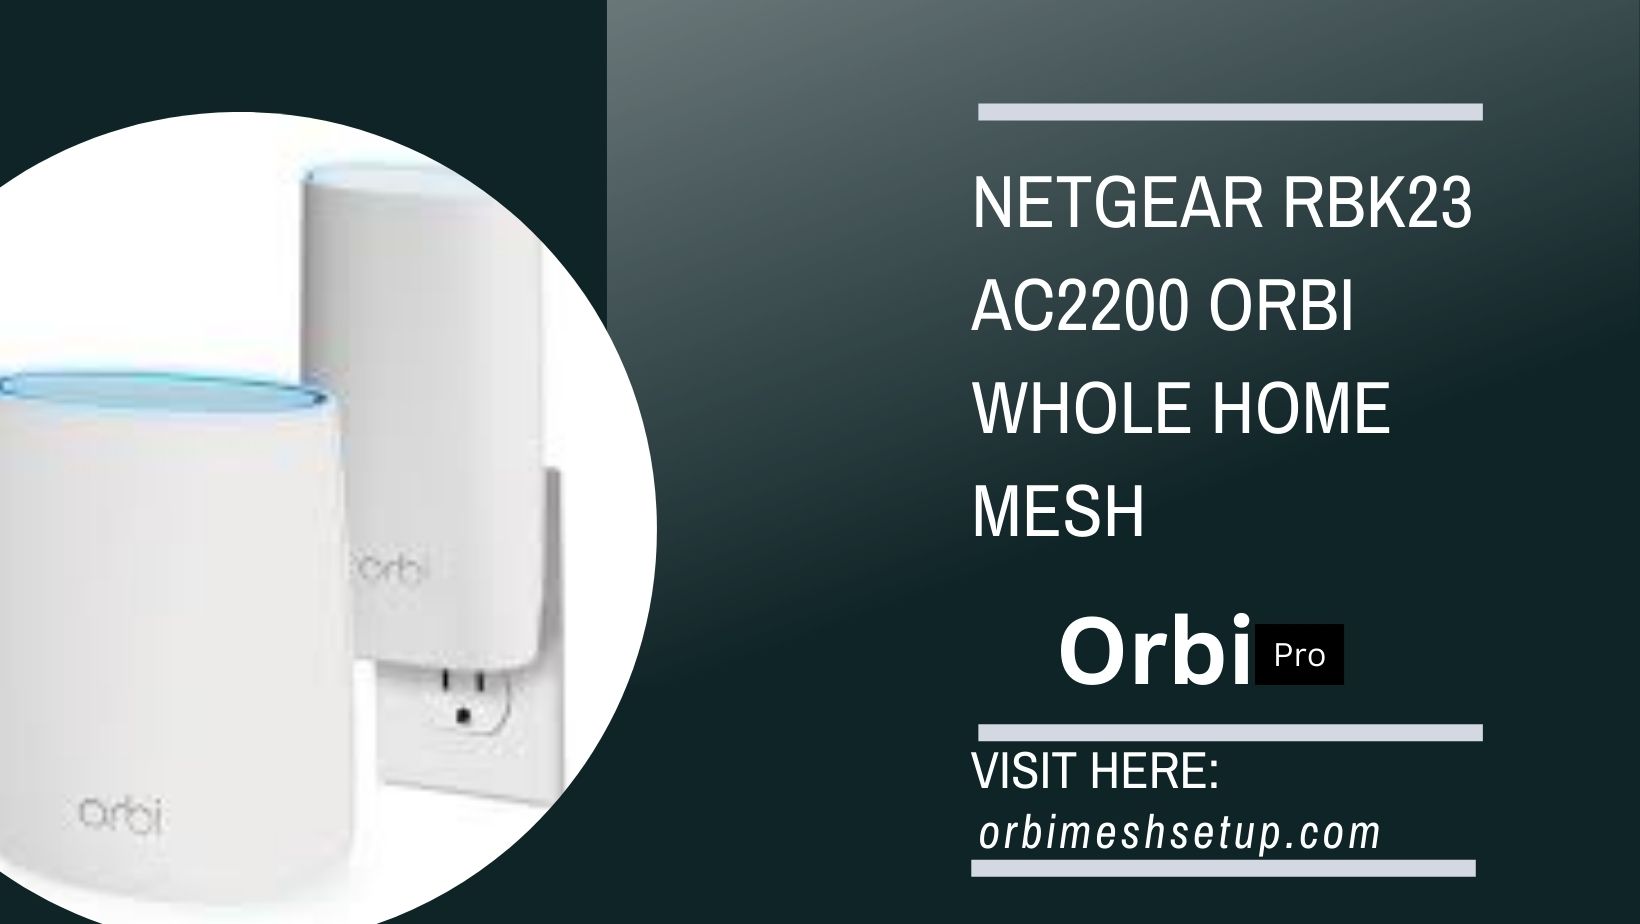 You are currently viewing Netgear RBK23 AC2200 Orbi Whole Home Mesh